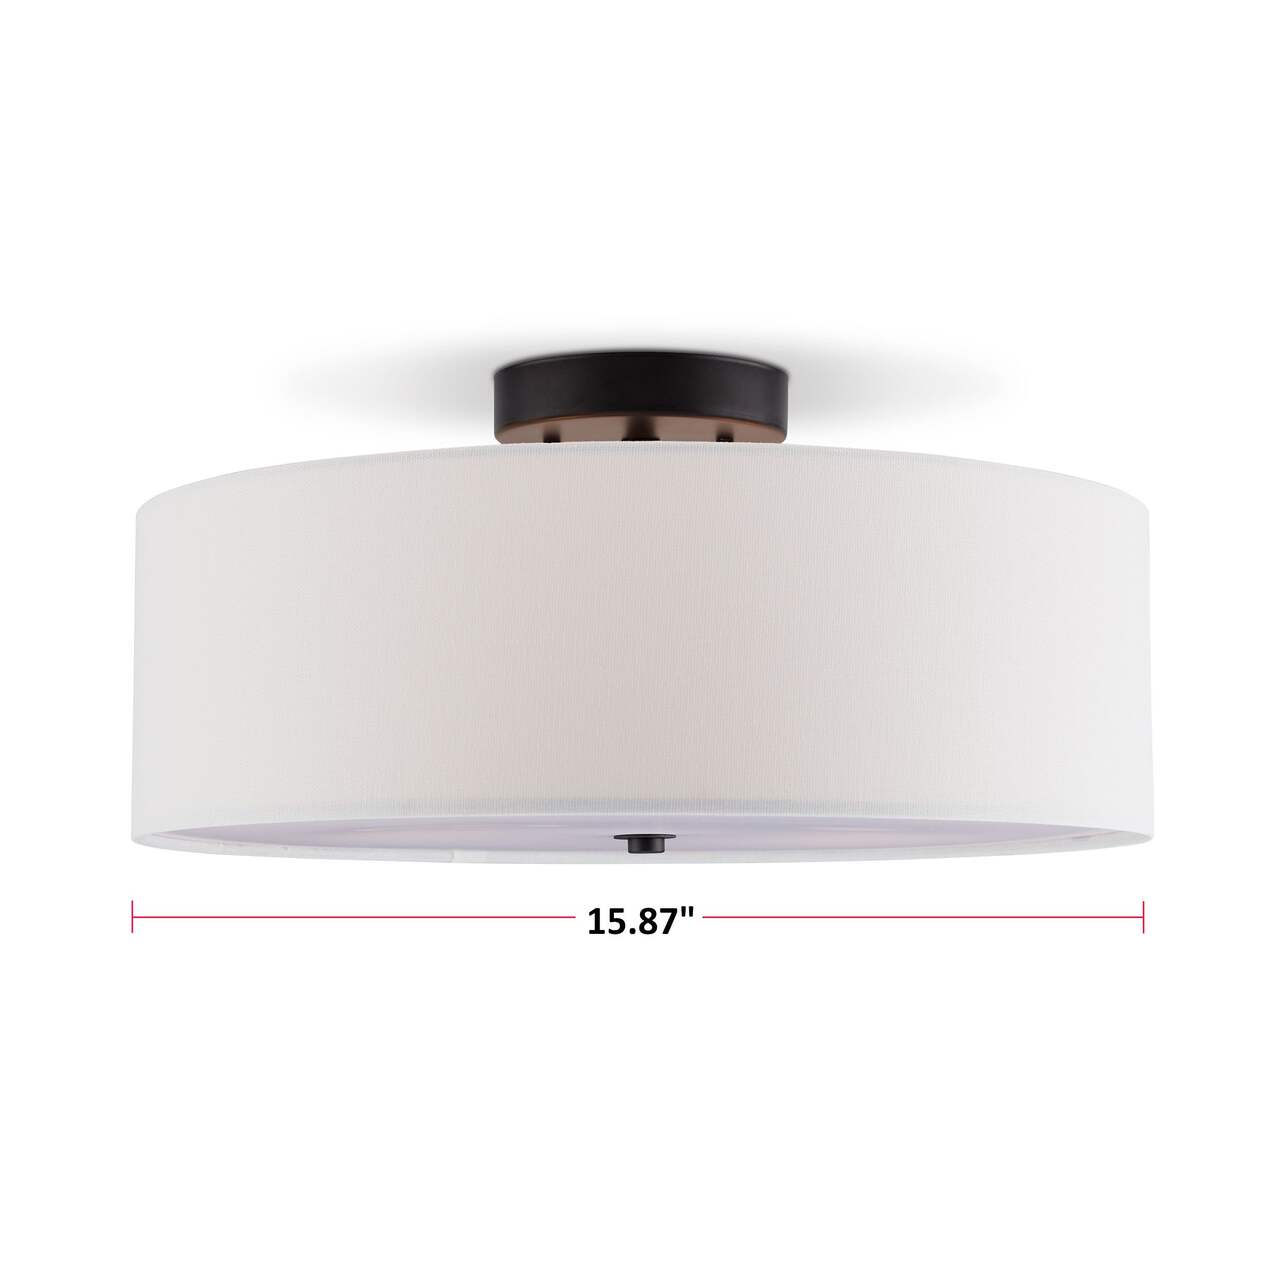 https://media-www.canadiantire.ca/product/fixing/electrical/lighting/0526108/canvas-preston-semi-flush-mount-64af72e9-7014-4285-8d32-f5e4ae7b1cc6-jpgrendition.jpg?imdensity=1&imwidth=1244&impolicy=mZoom